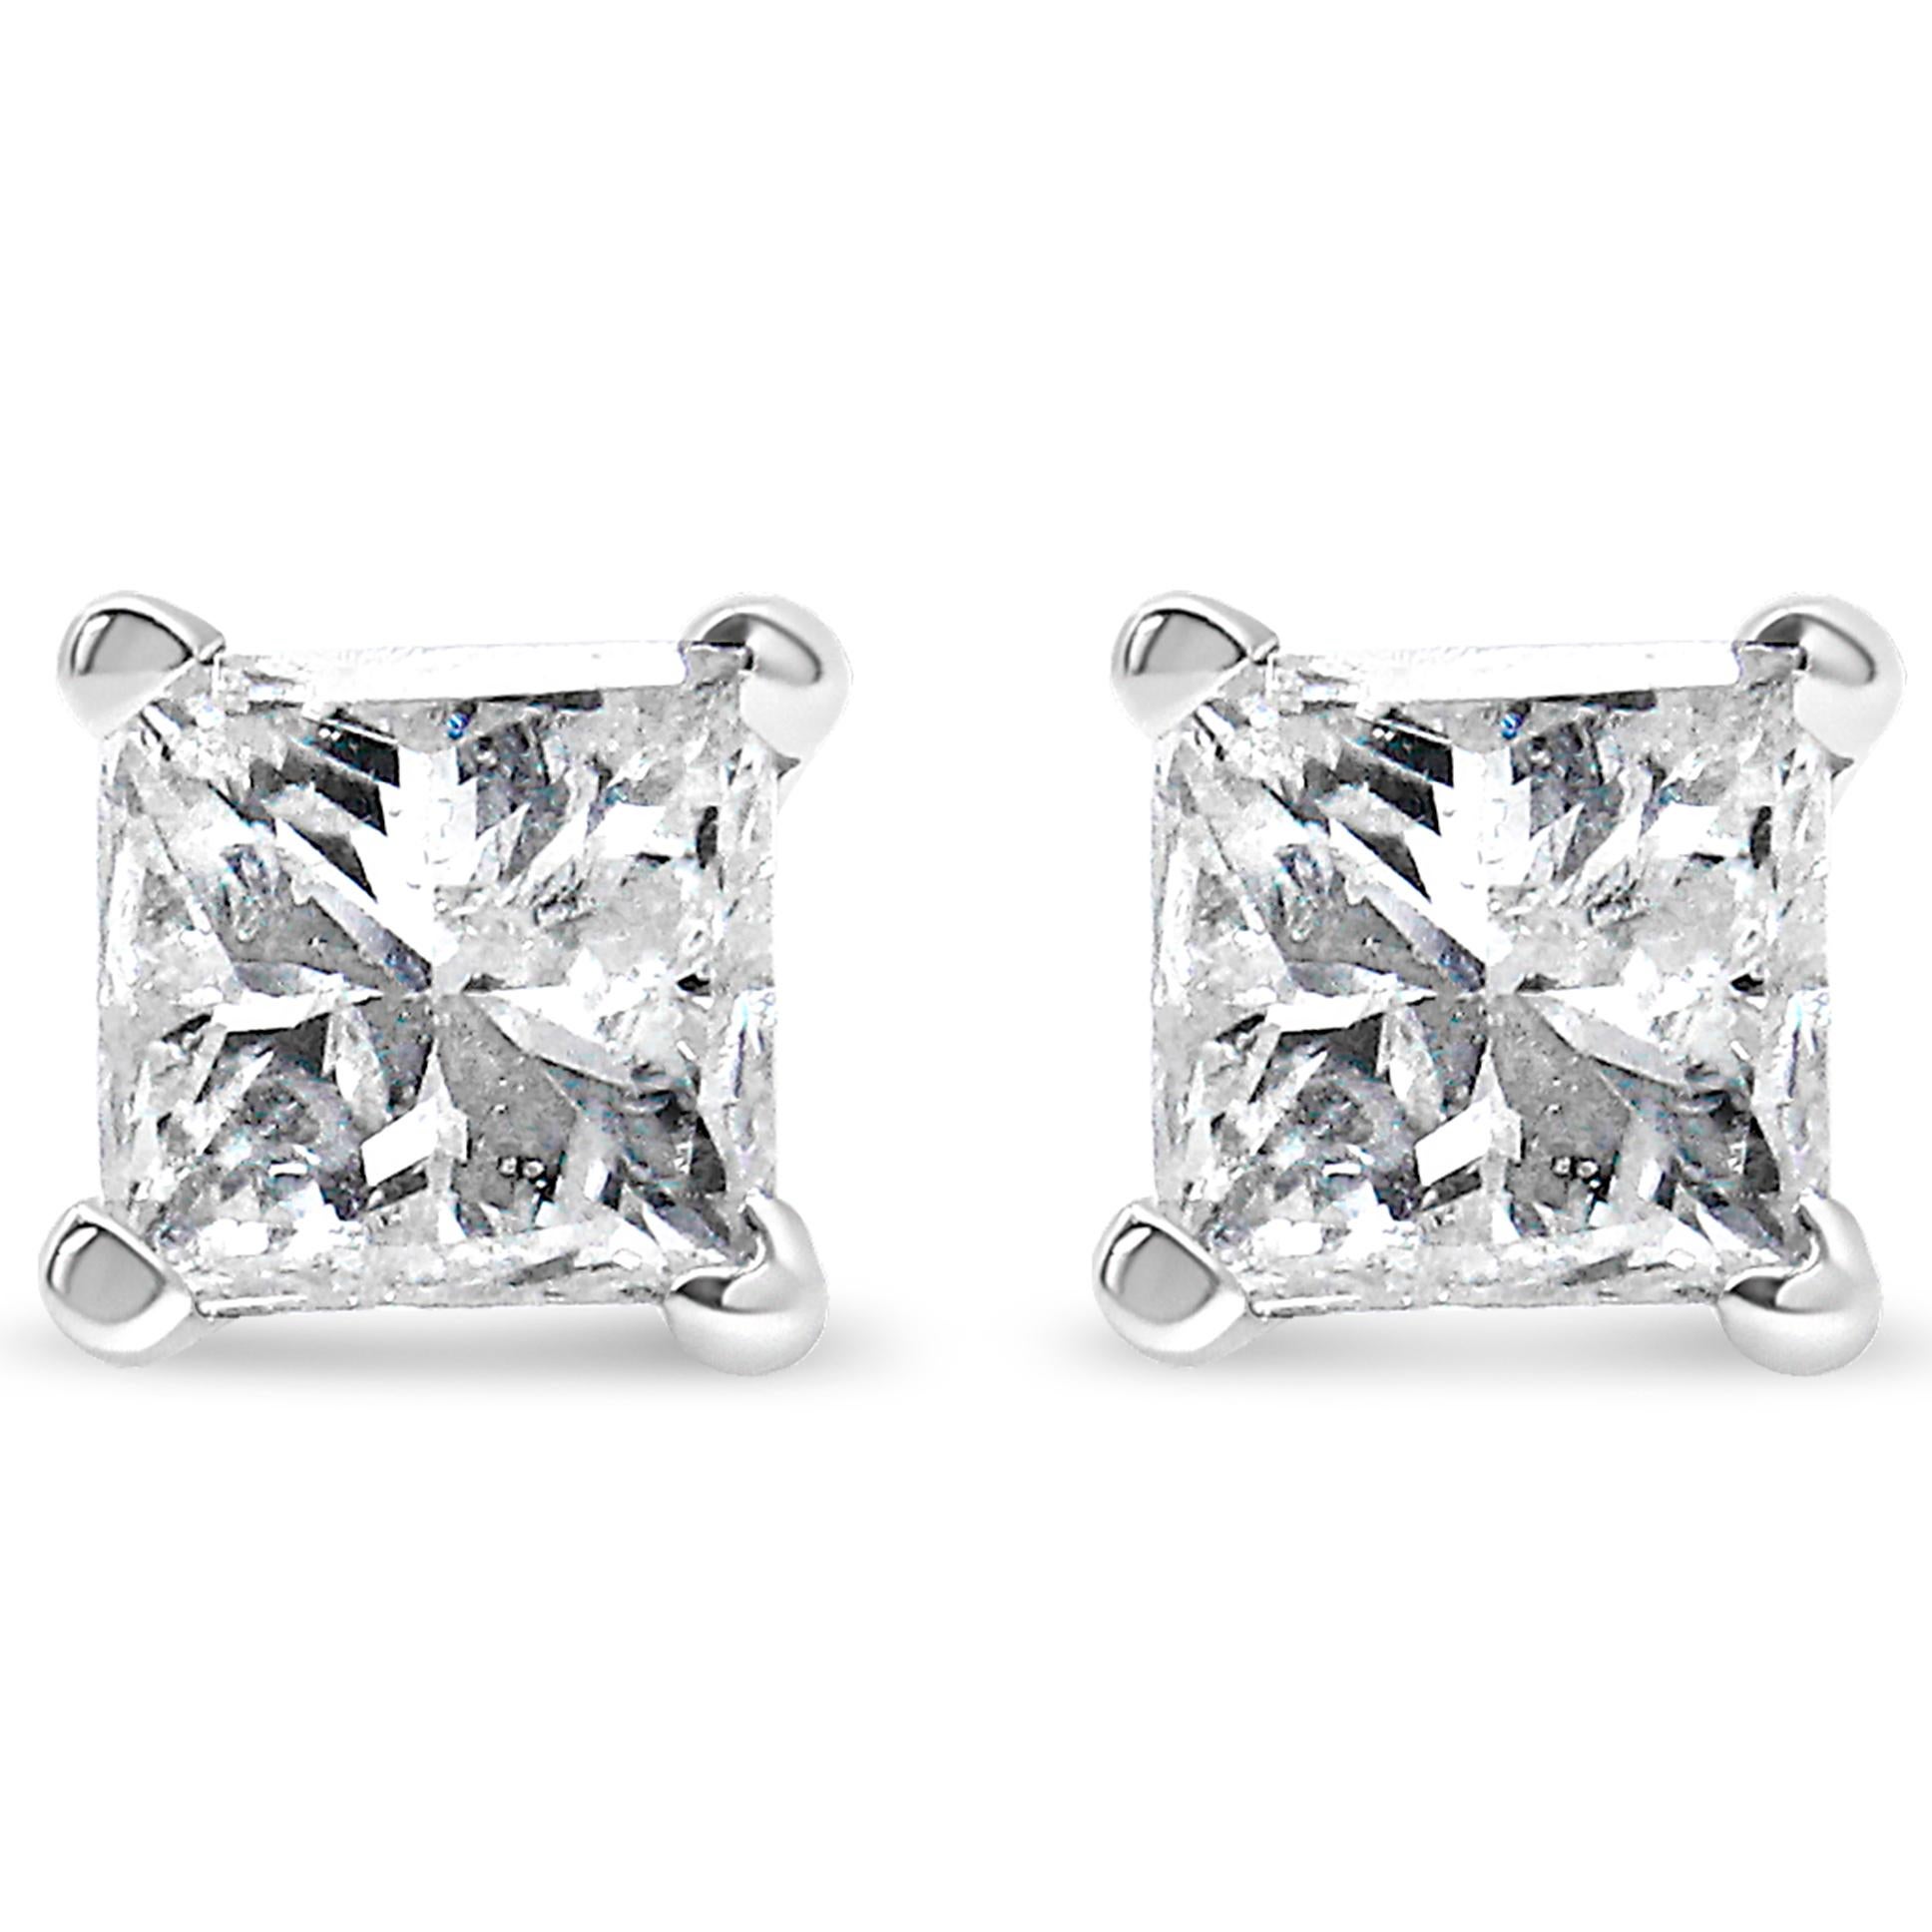 Frame her face with the bold and impressive look of these fabulous princess cut diamond stud earrings. Crafted in genuine 14 Karat gold, each earring features a mesmerizing princess cut square diamond solitaire in a timeless four-prong setting.